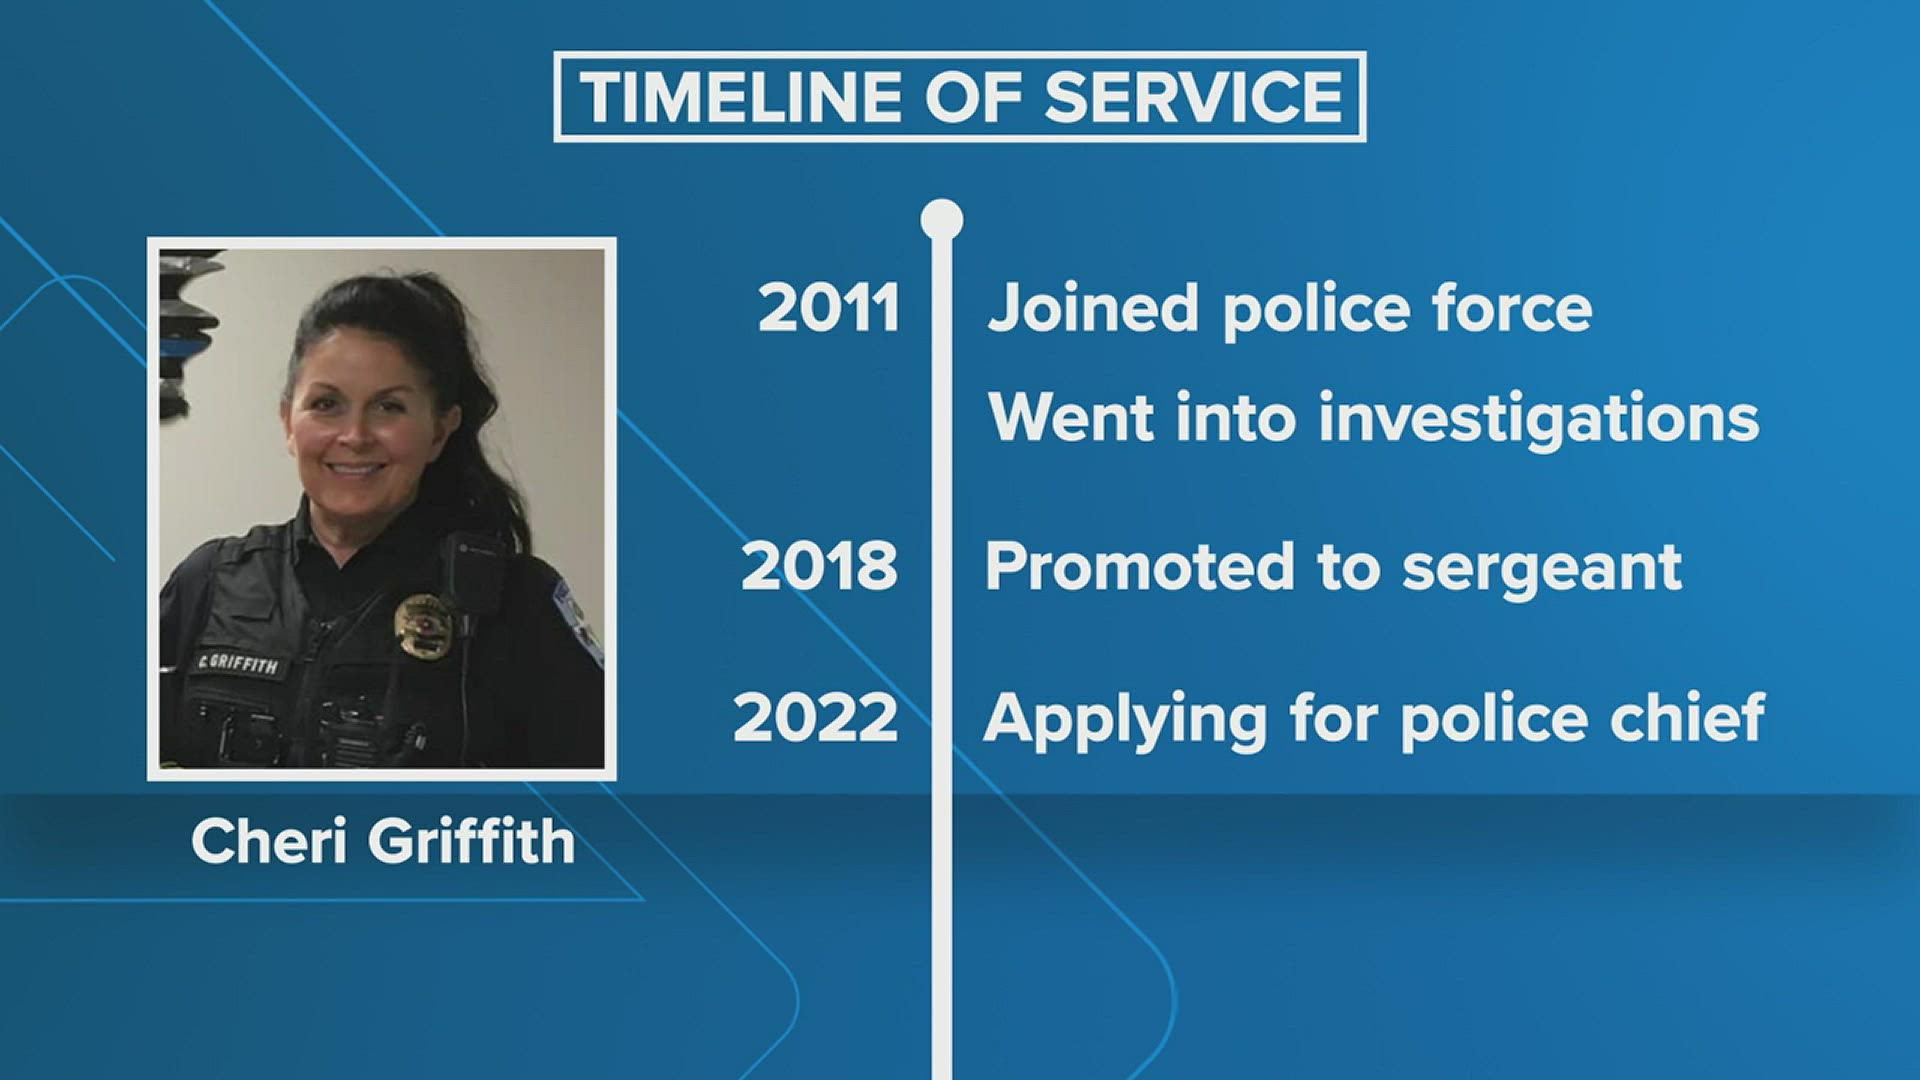 Sergeant Cheri Griffith could become the department’s new police chief. If this happens, Griffith would be the first female police chief in Southeast Texas.